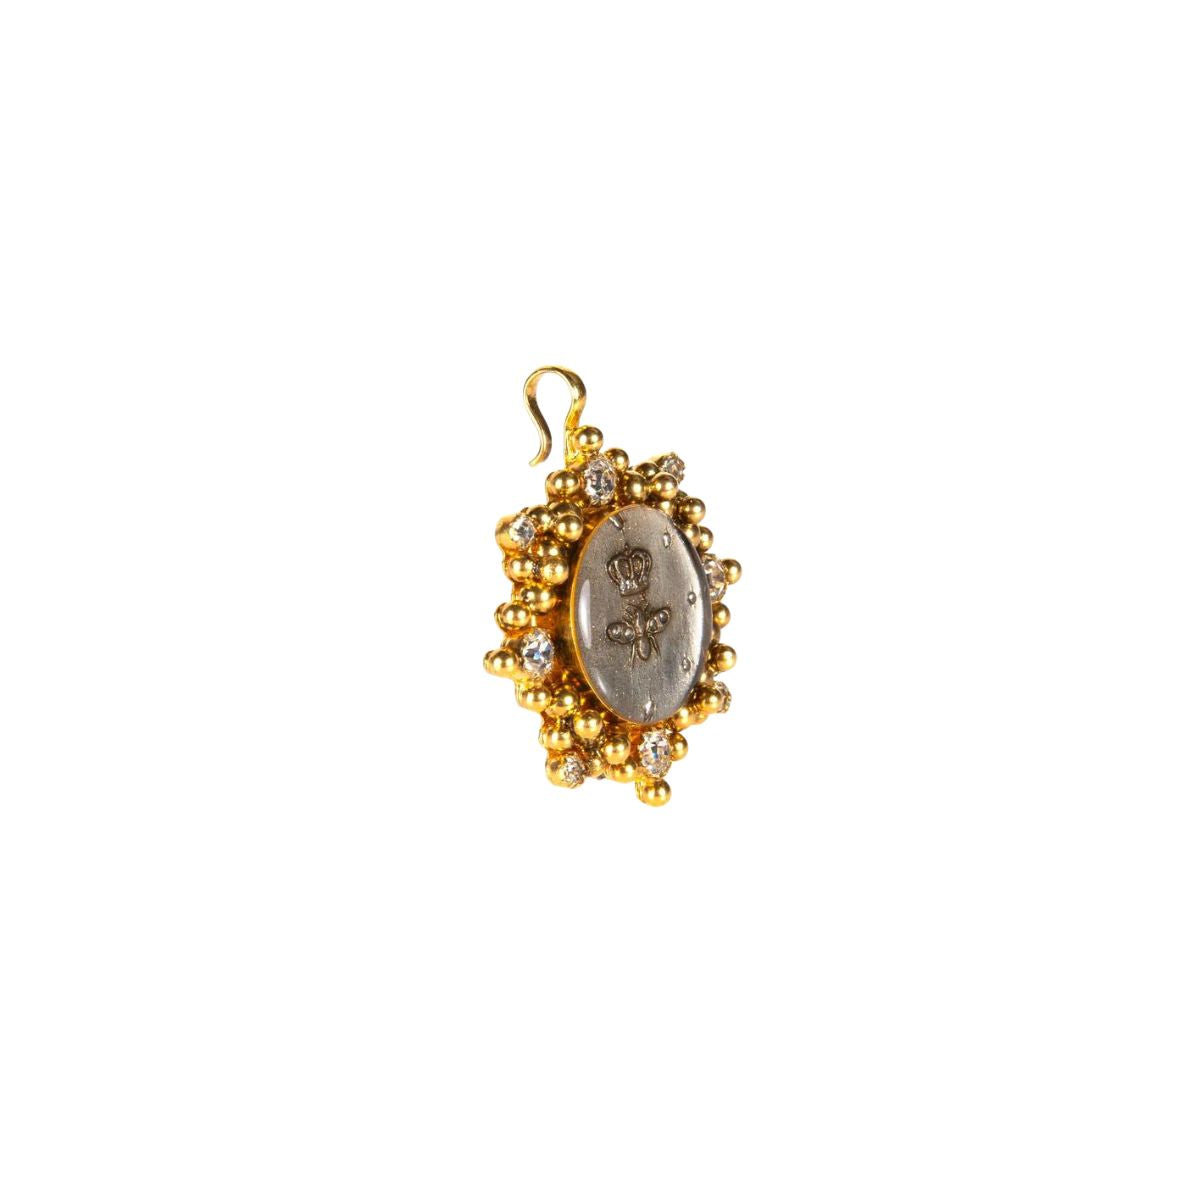 VSA Cloister Queen Bee Medallion in Gold